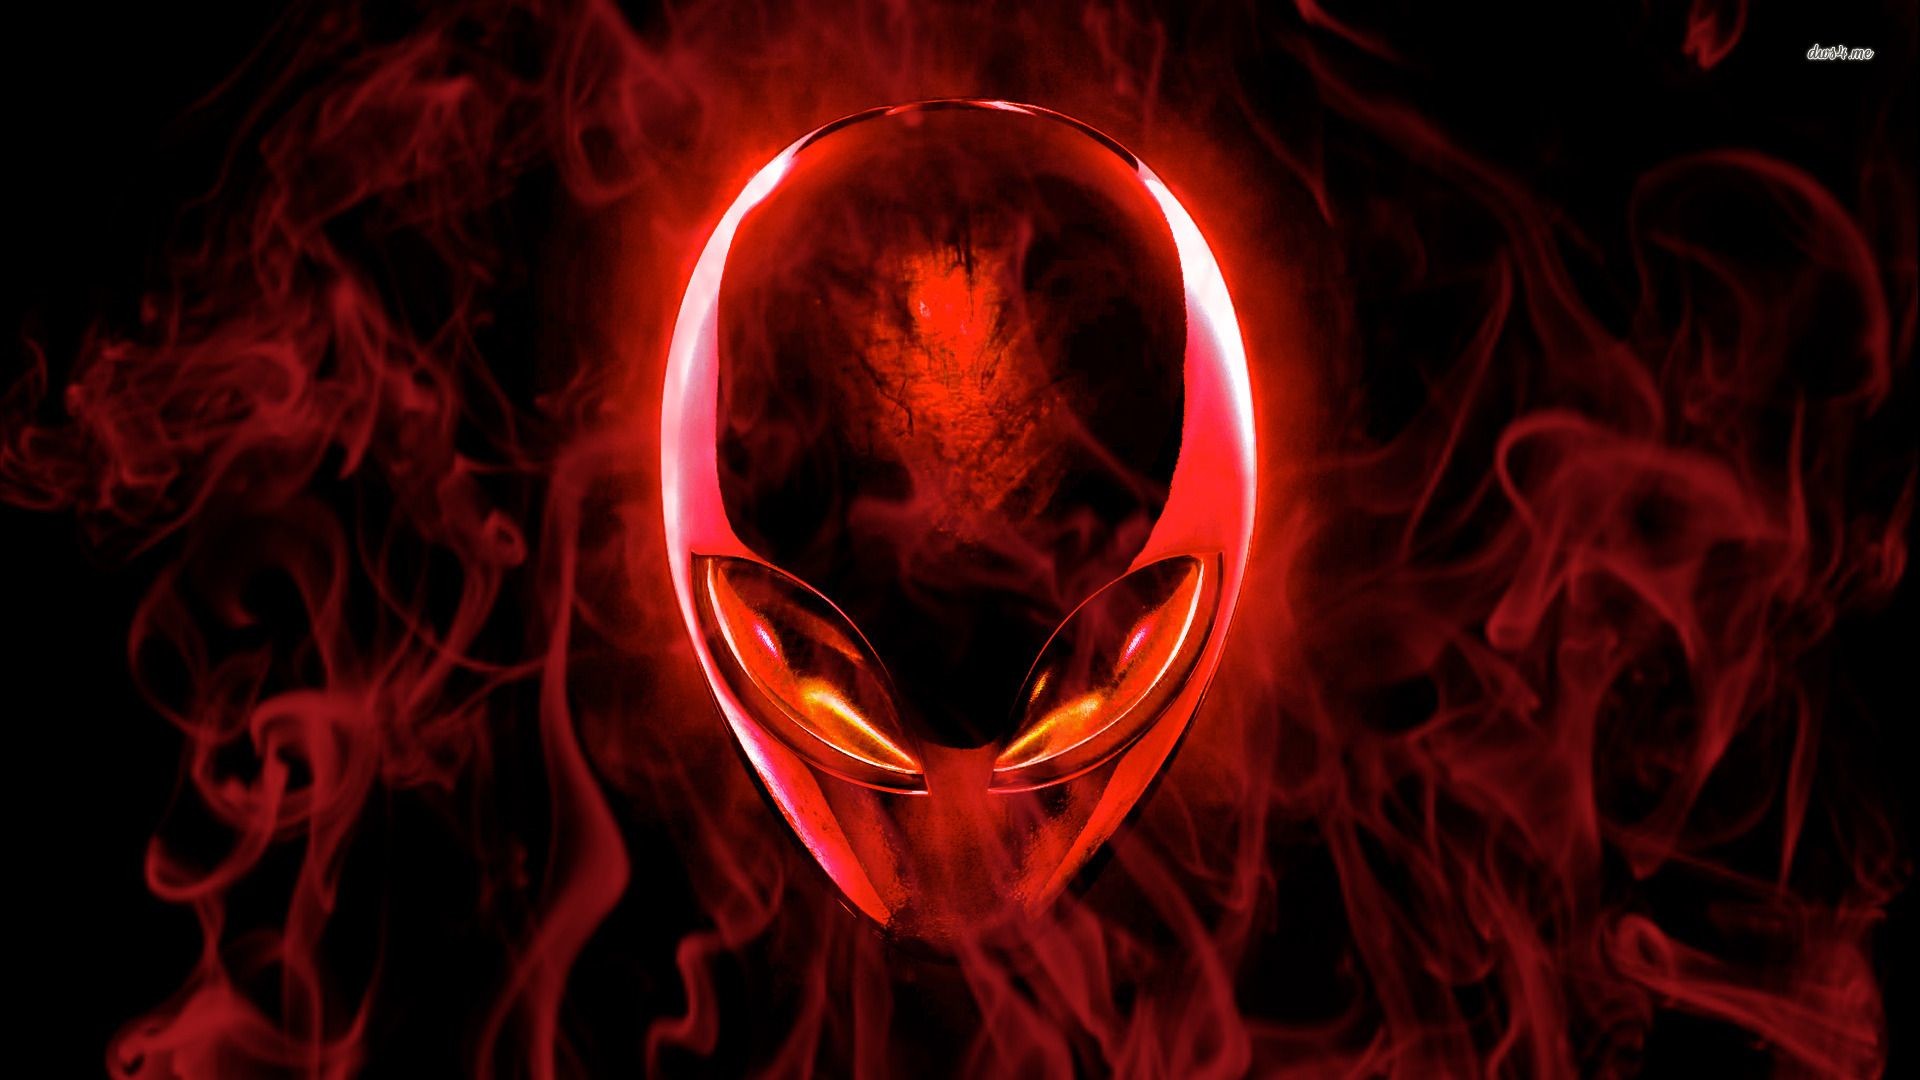 1920x1080 Backgrounds High Resolution: alienware red image by Trayton Little